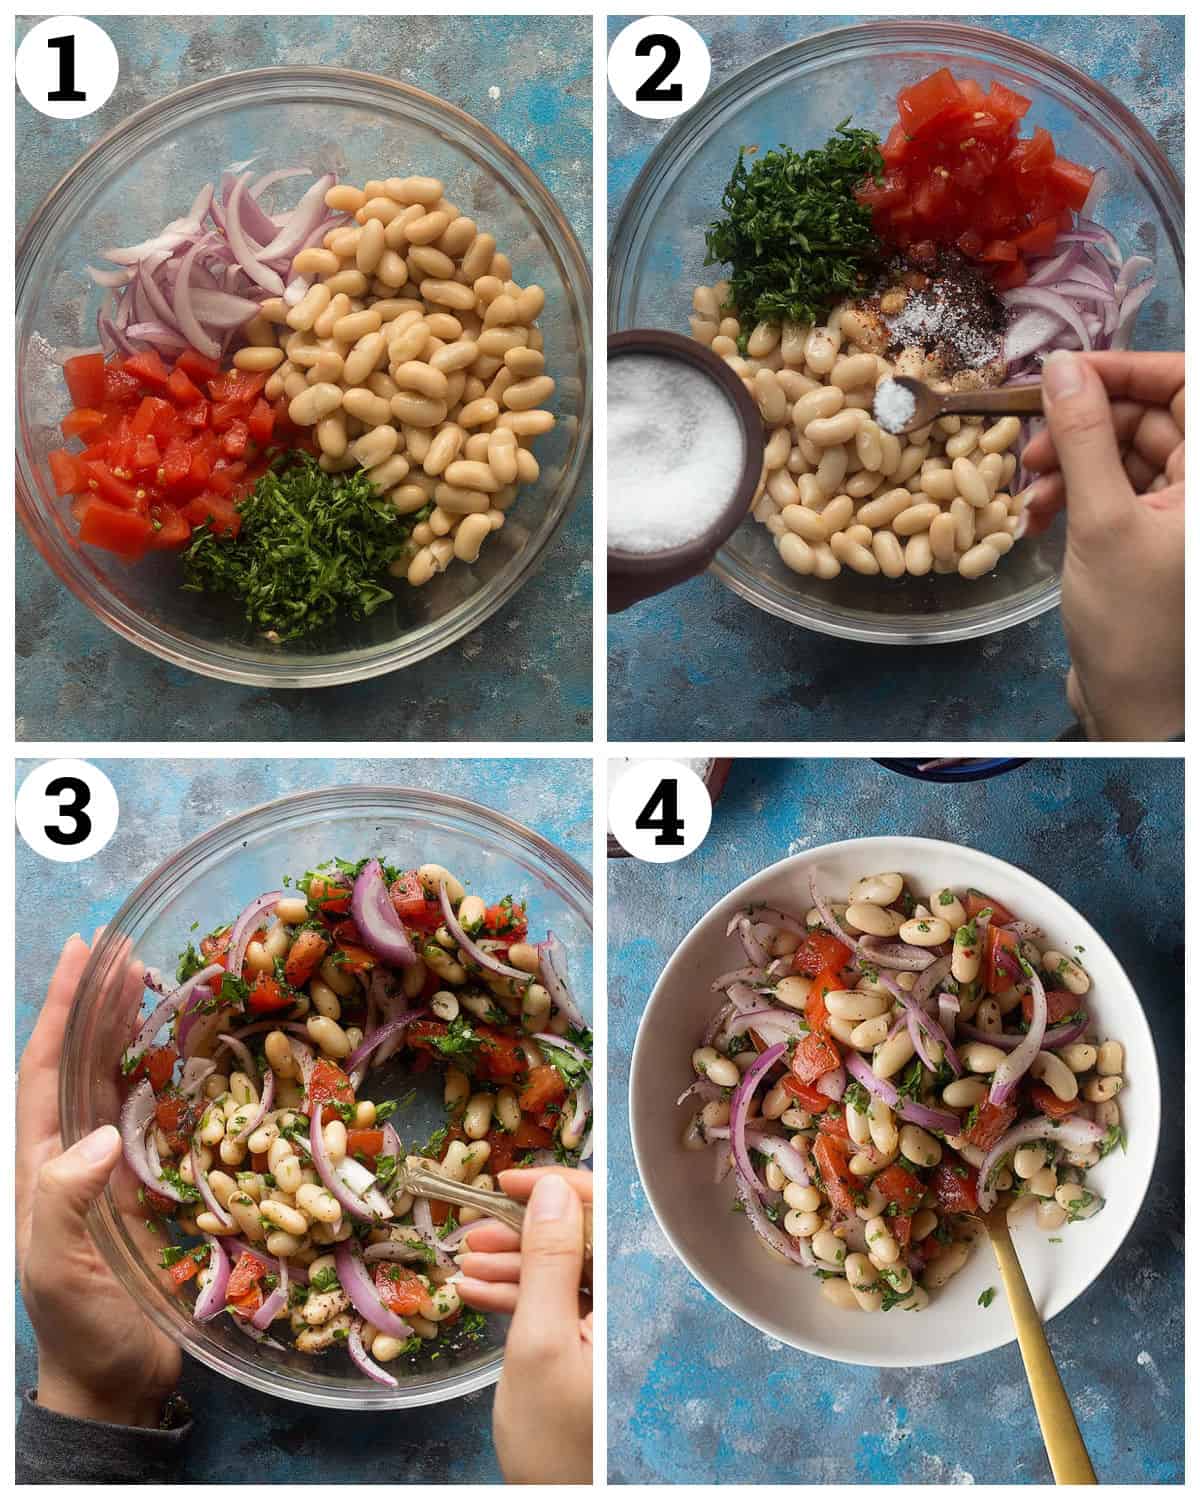 Place the beans with the vegetables in the bowl and add the seasoning. Mix and serve. 